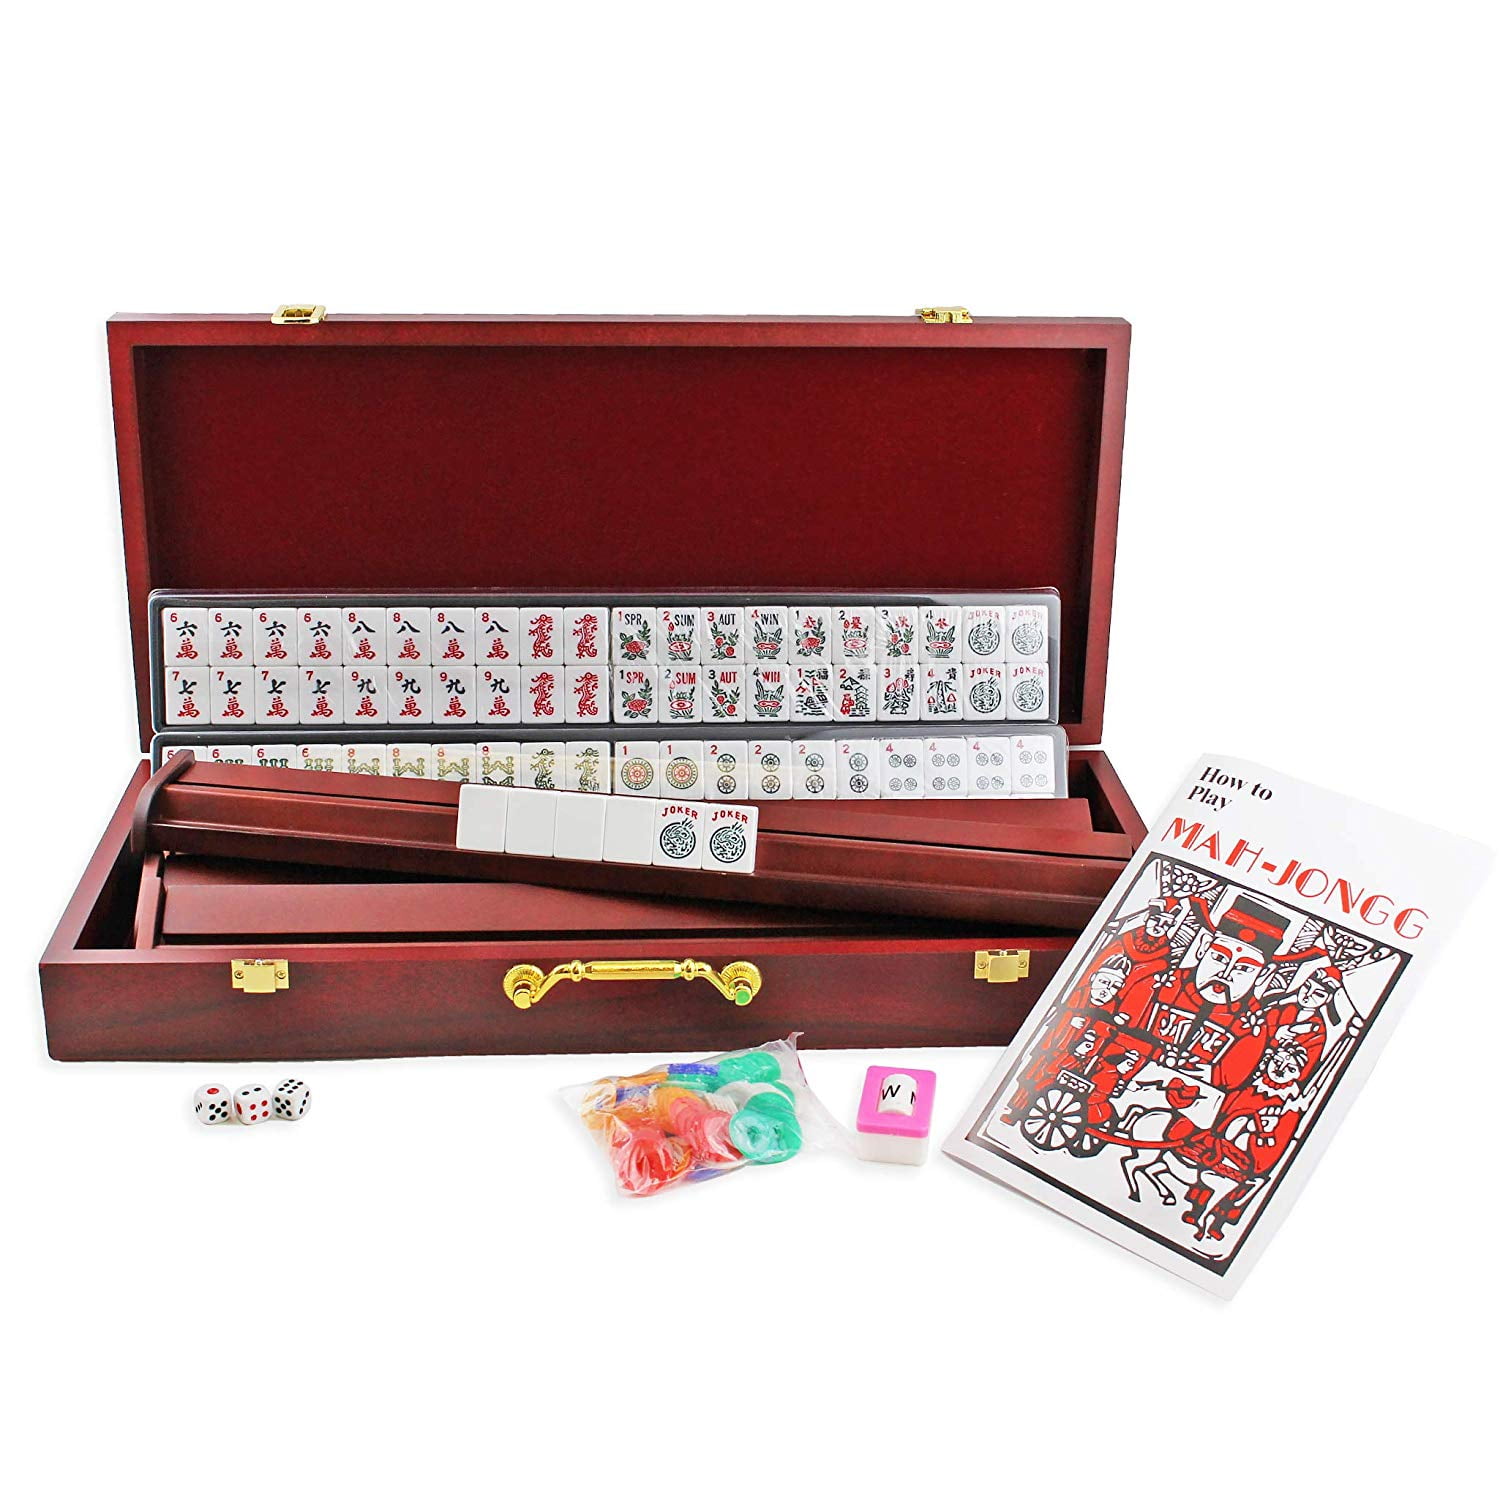 Stylish branded mahjong tiles you should get for Chinese New Year